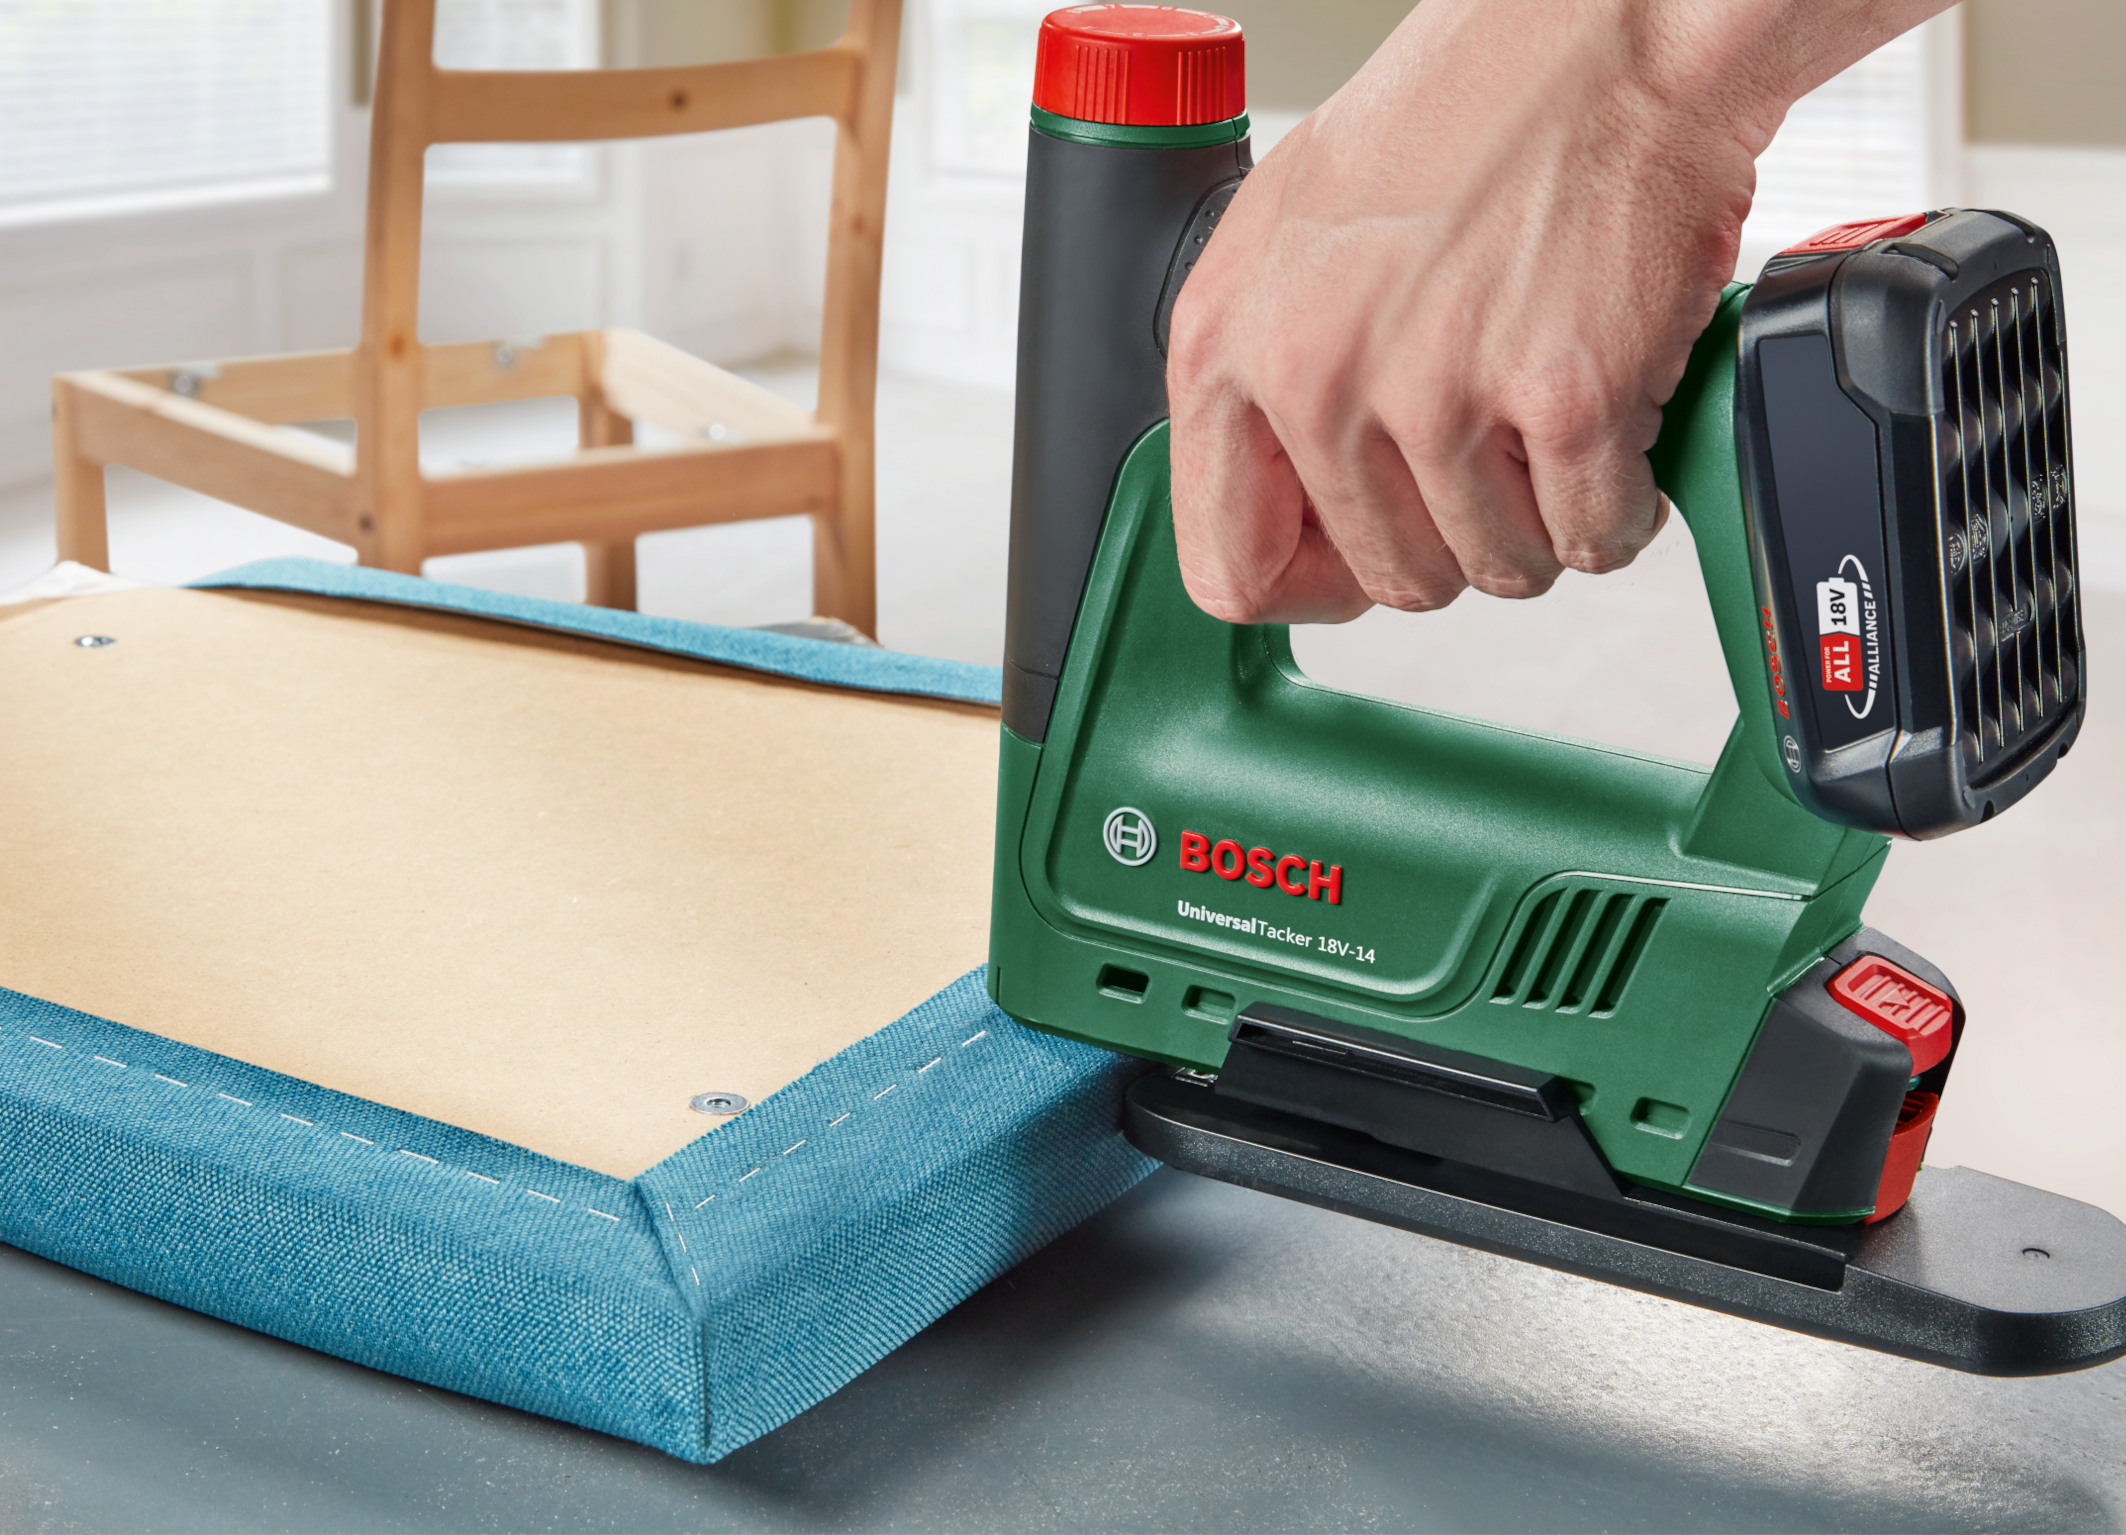 Separate attachment available for unlocking additional applications: First 18V cordless tacker from Bosch for DIYers